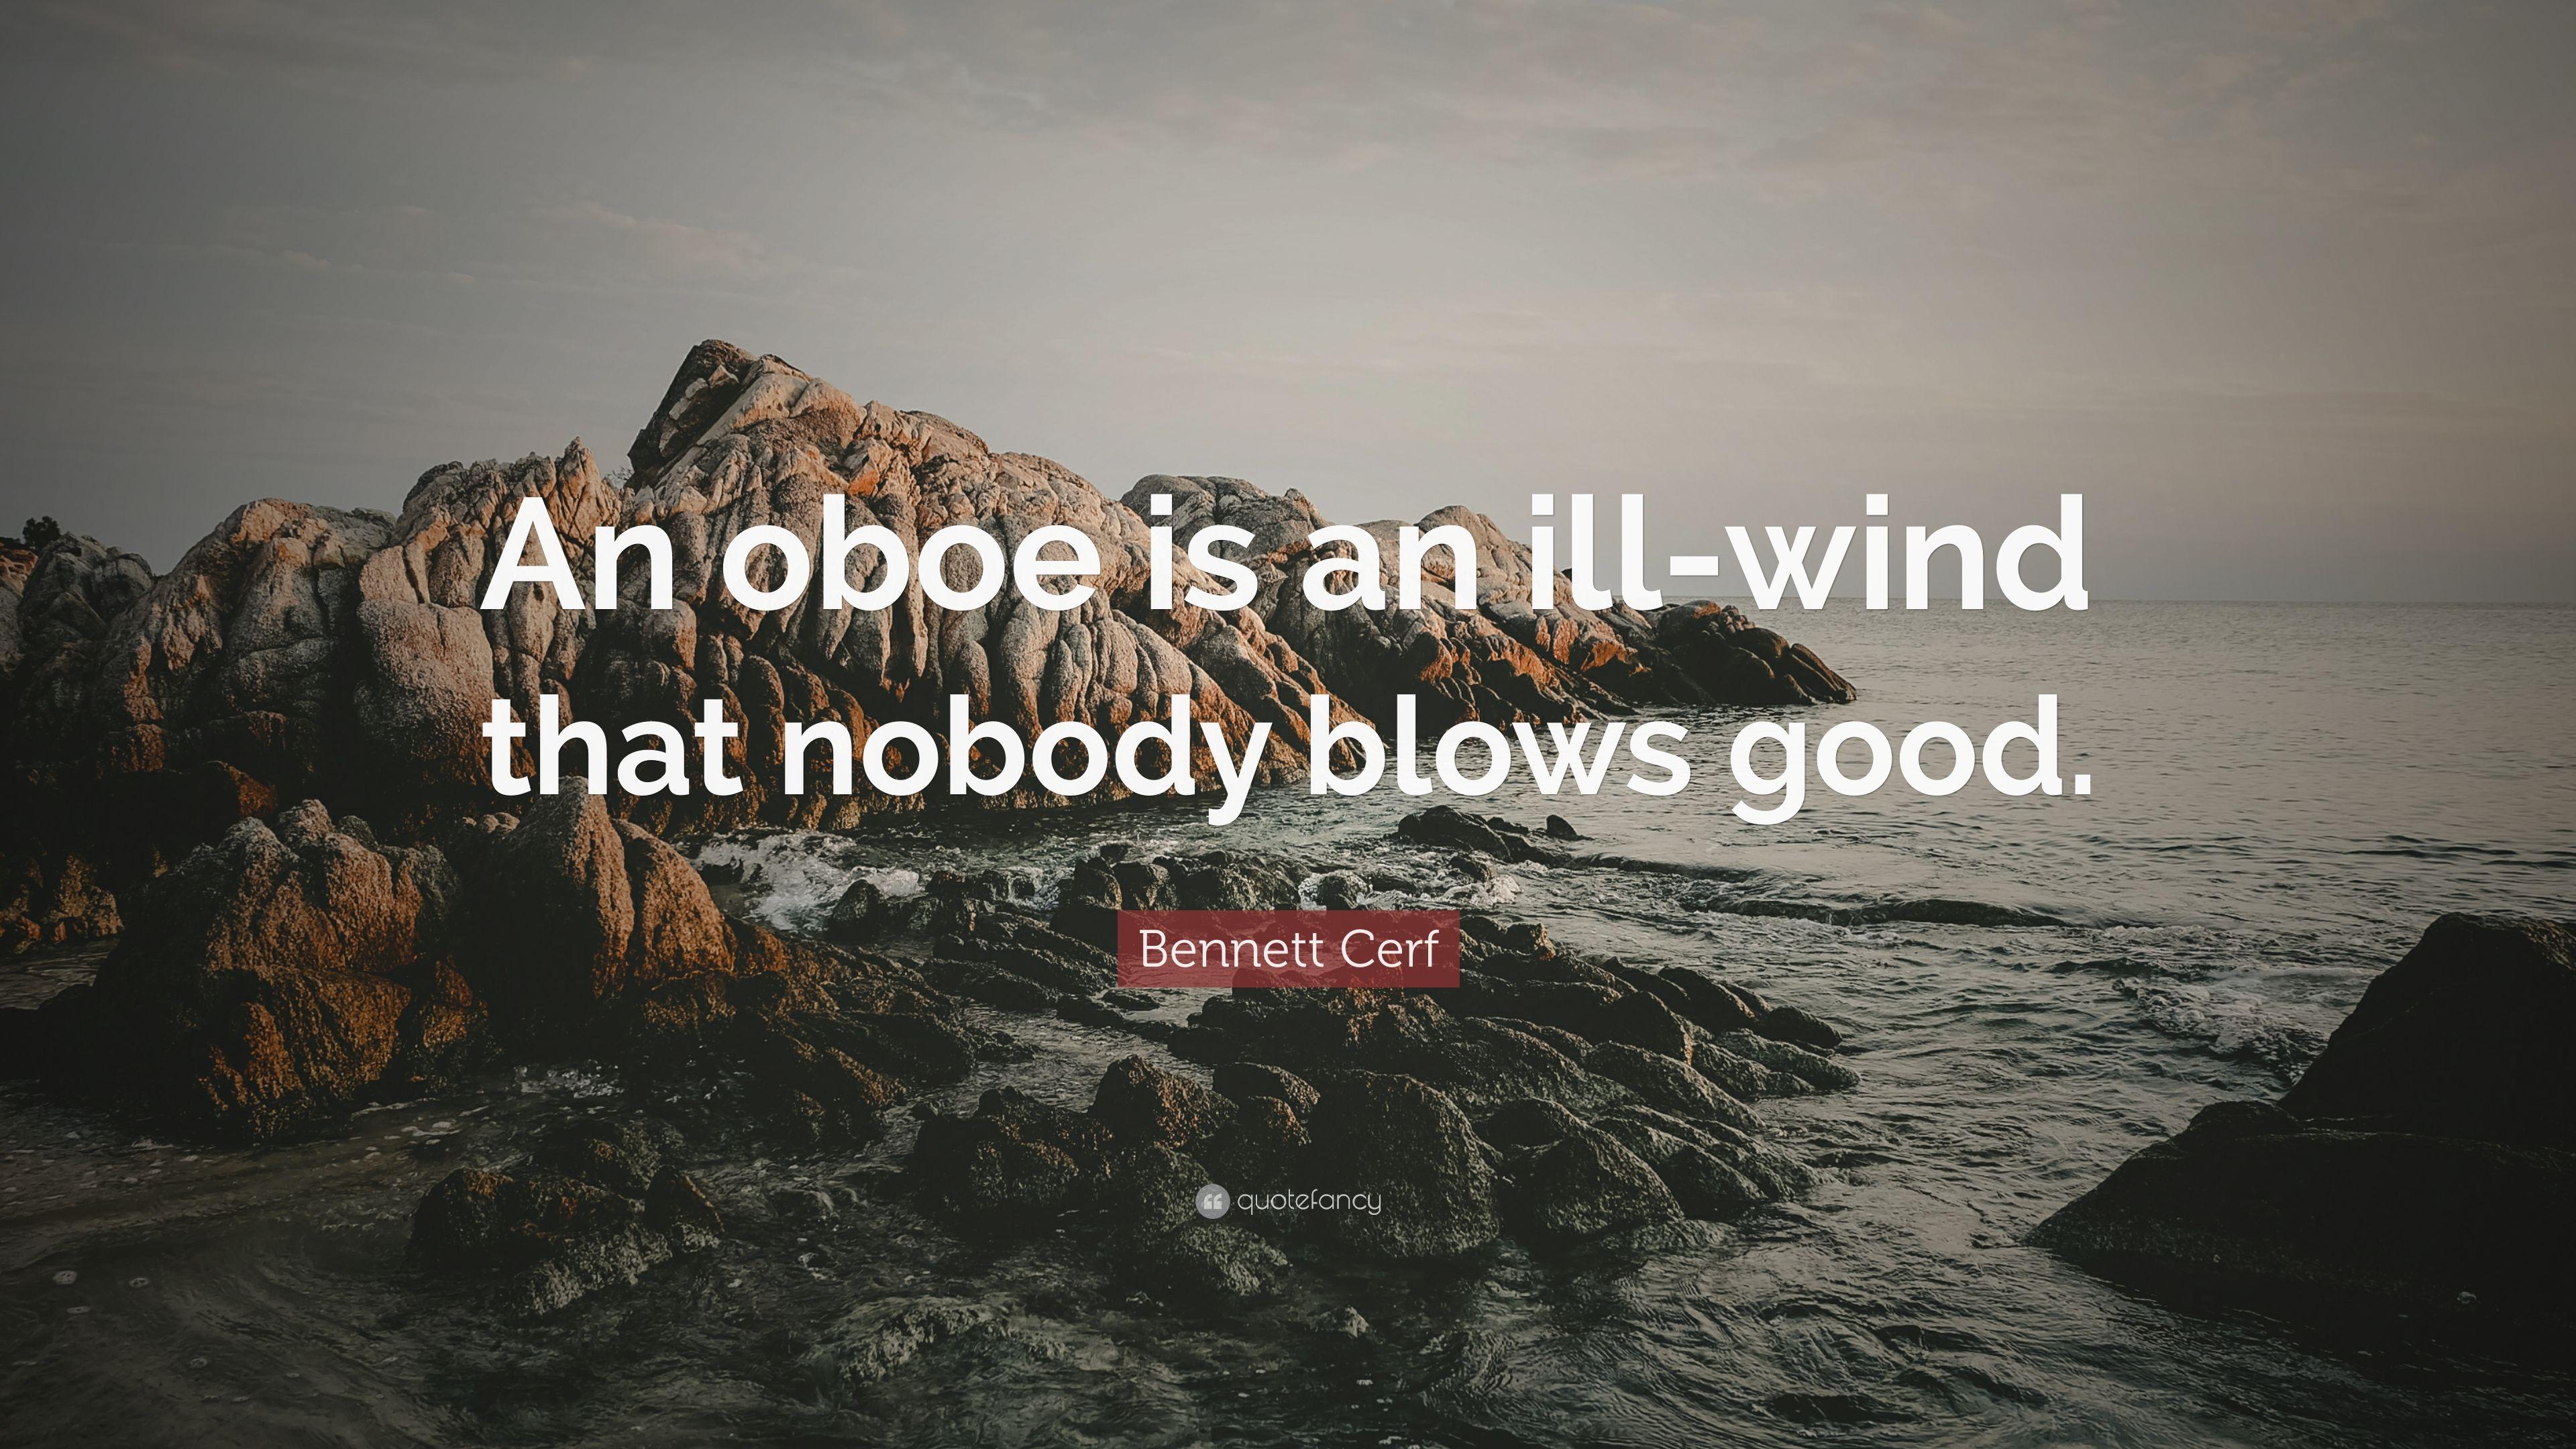 Bennett Cerf Quote: “An Oboe Is An Ill Wind That Nobody Blows Good